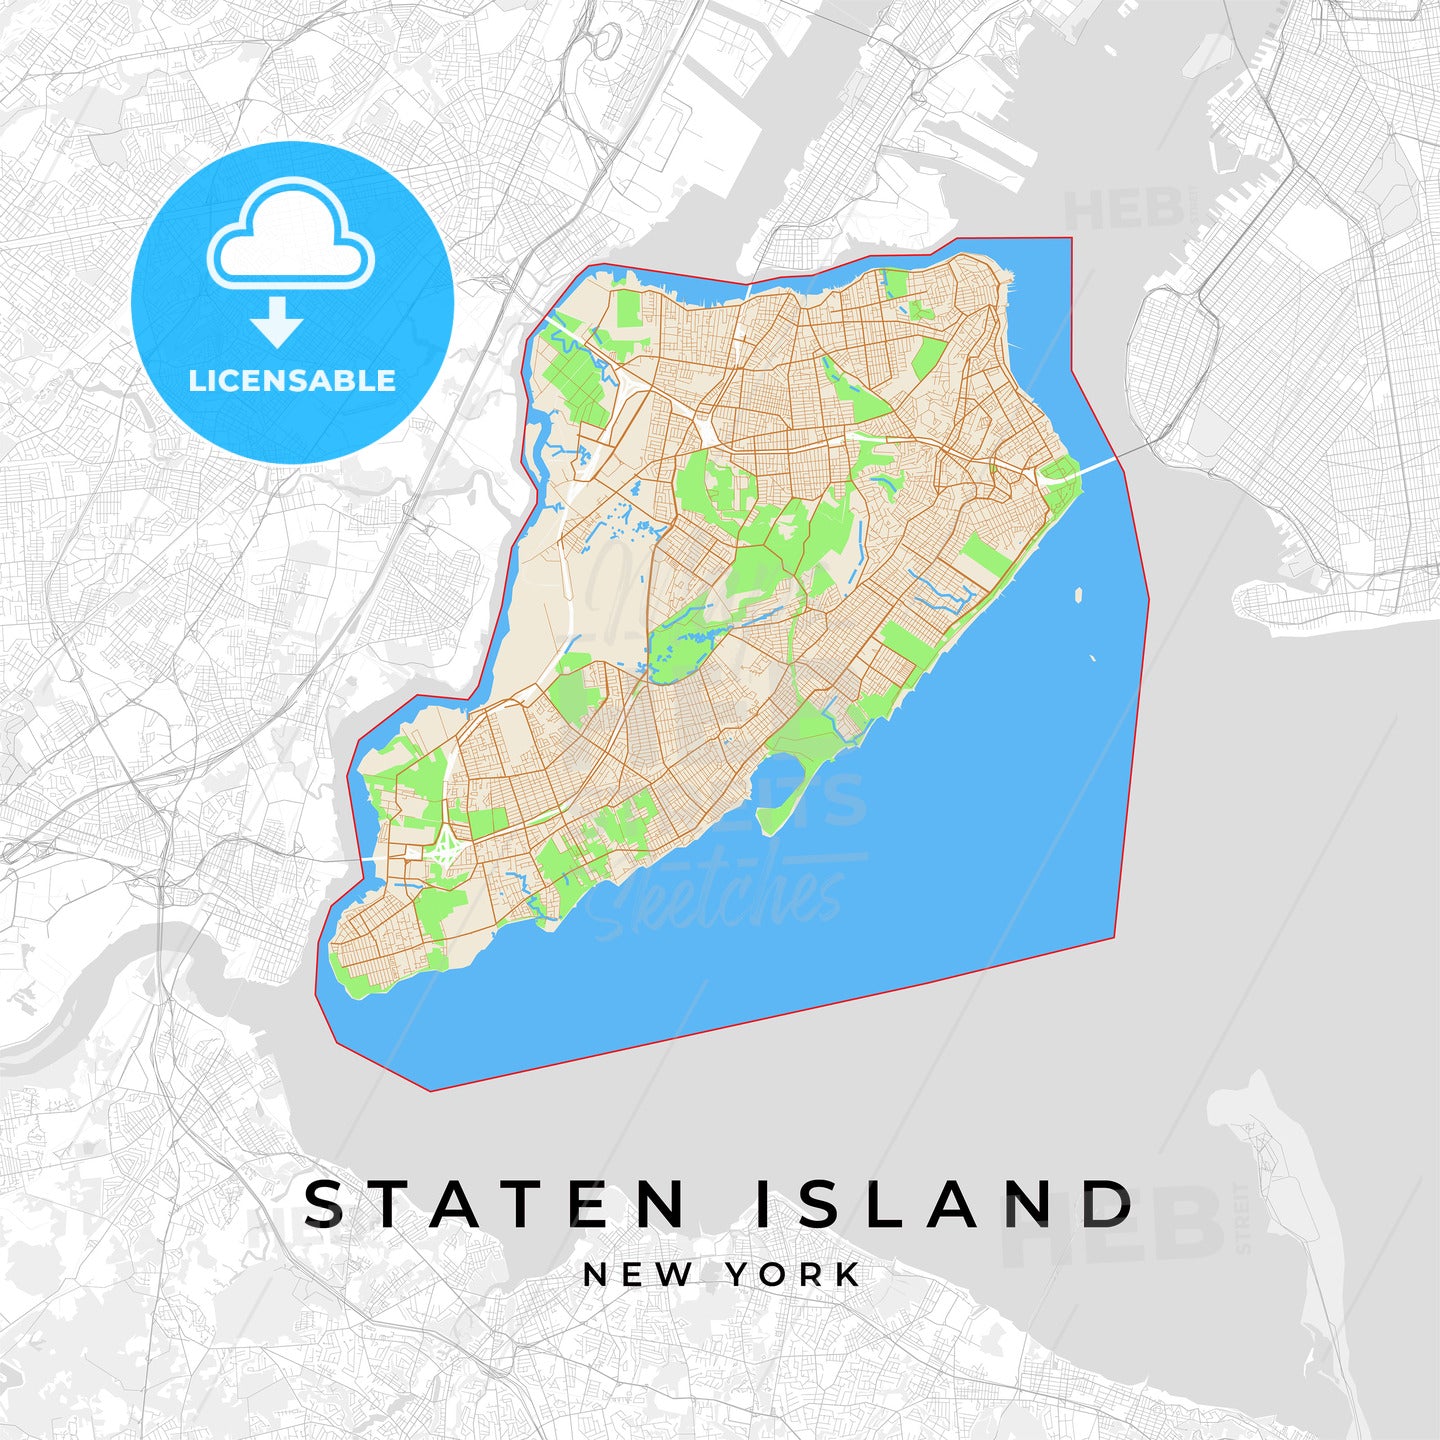 Vector map of Staten Island, New York, USA - HEBSTREITS